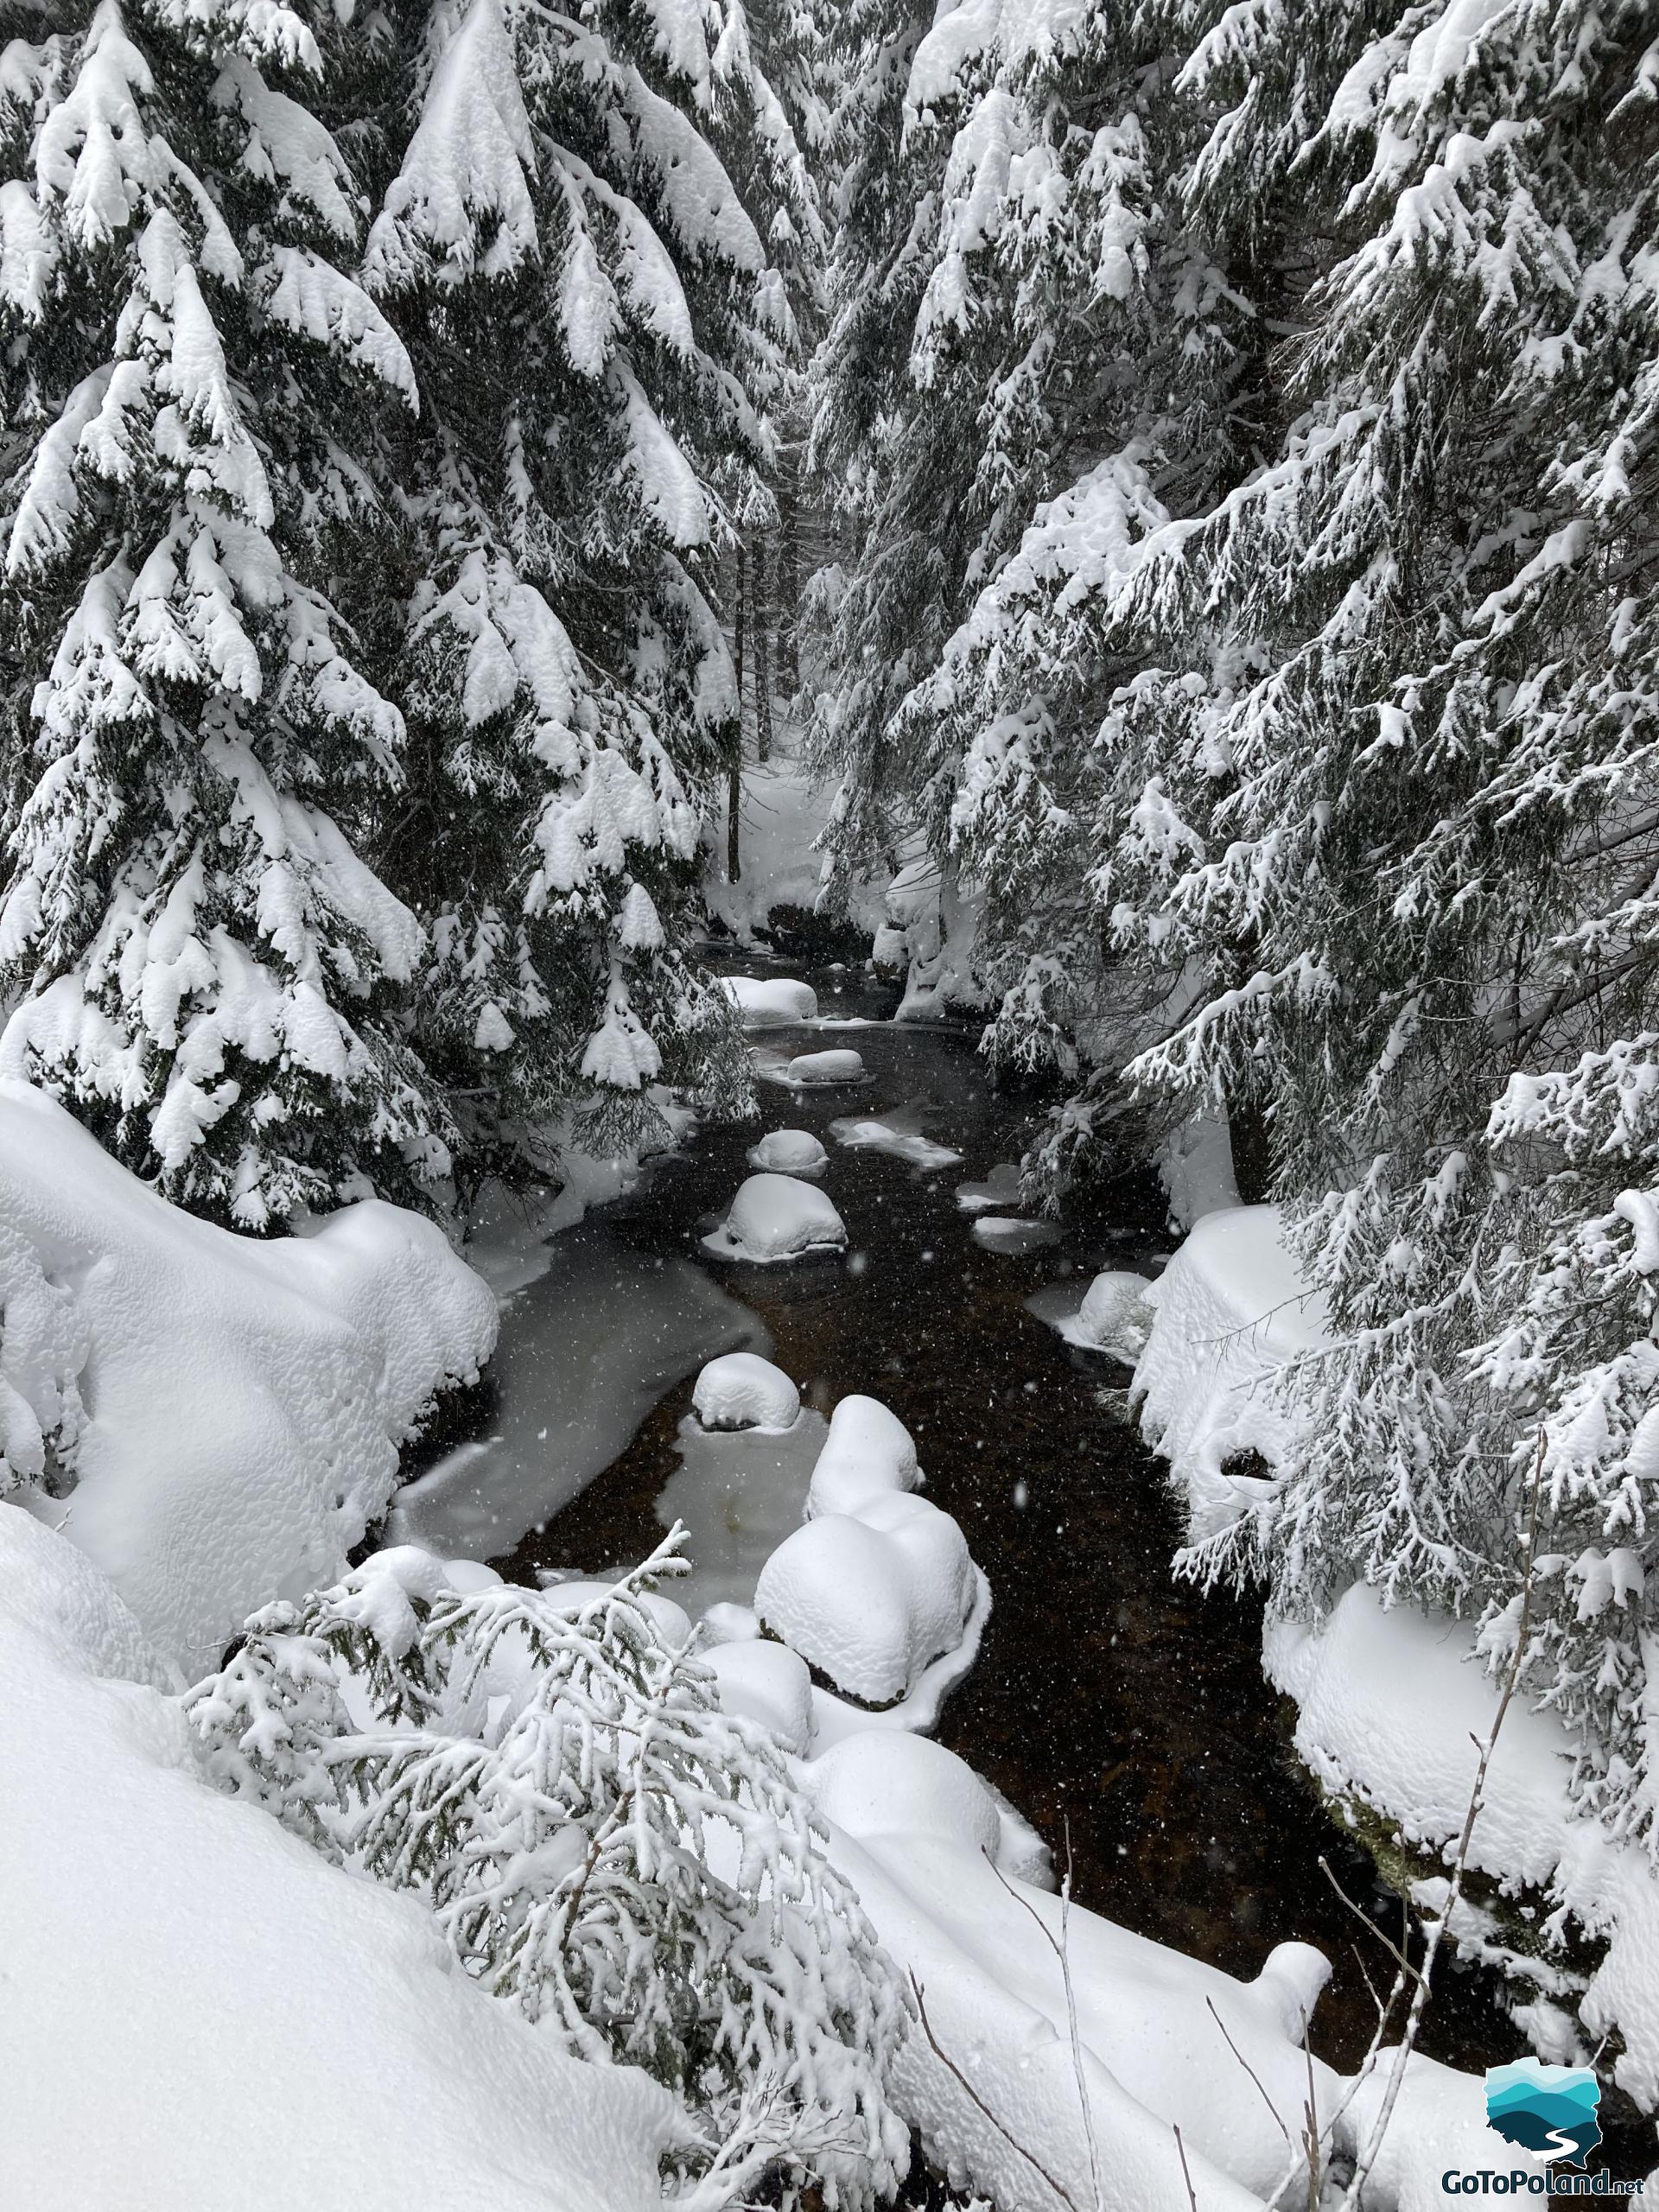 Winter landscape with spruces and large stones in a brook covered with snow